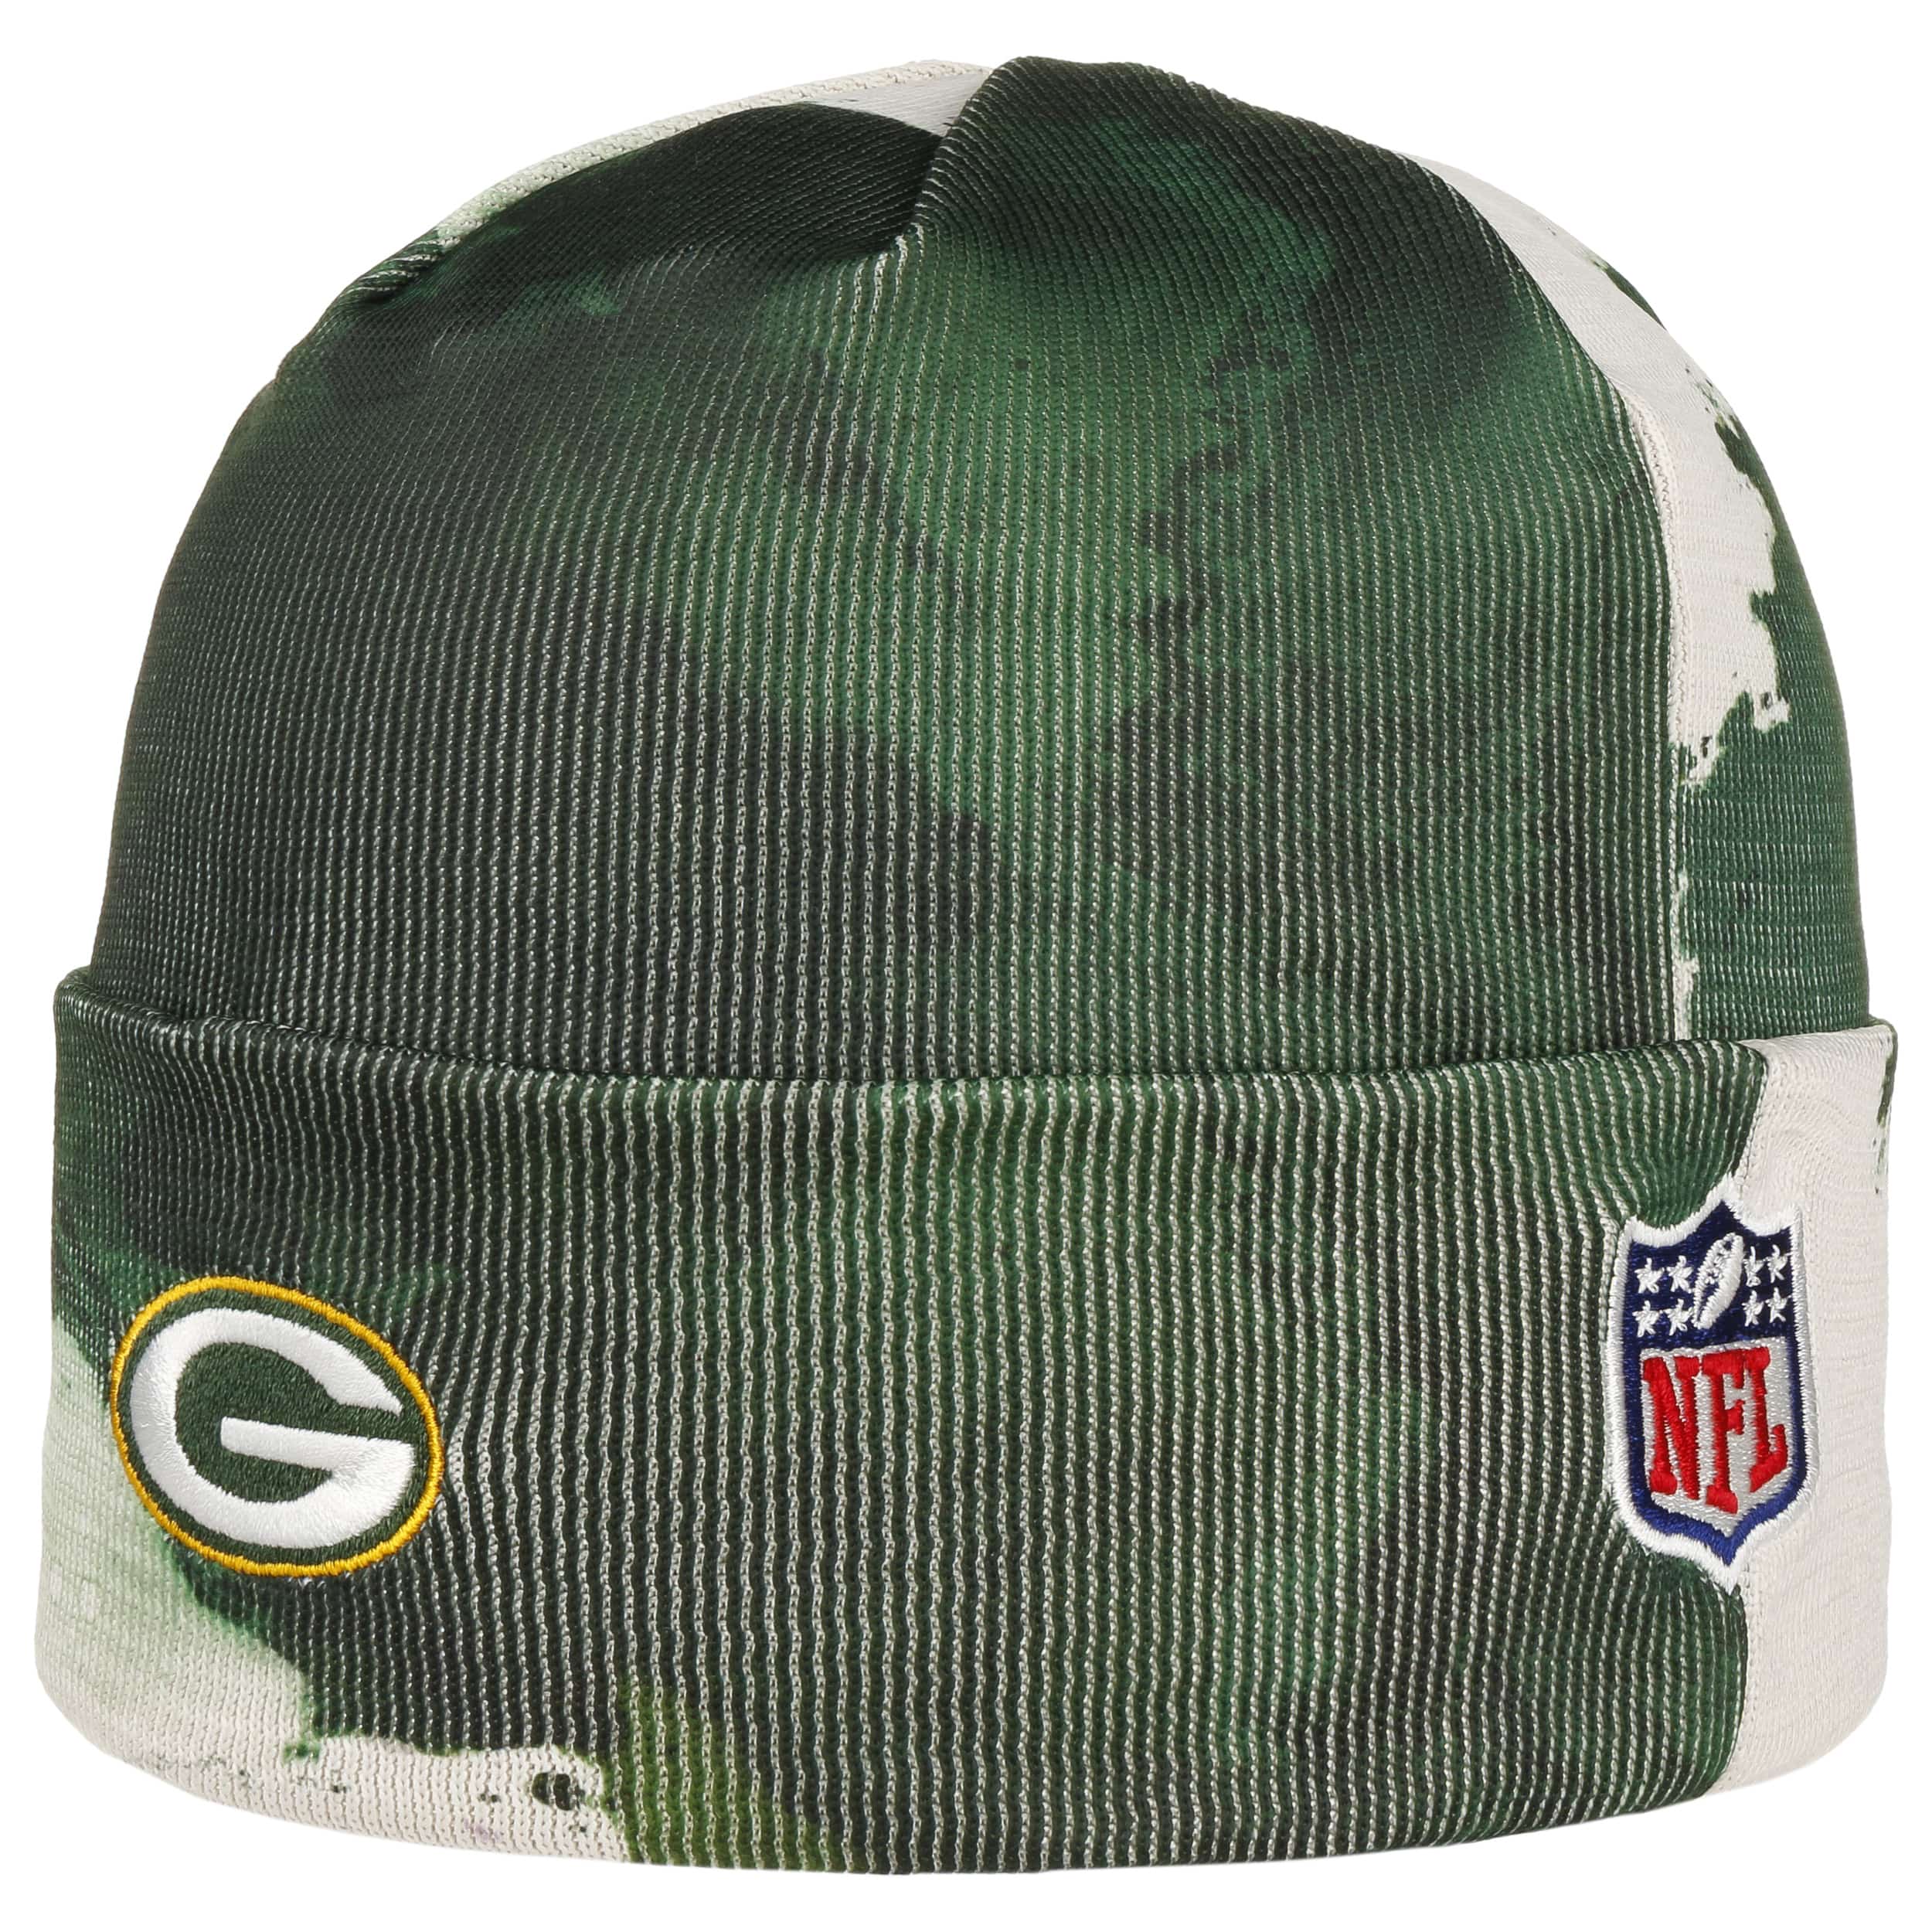 NFL 22 Ink Knit Packers Beanie Hat by New Era - 37,95